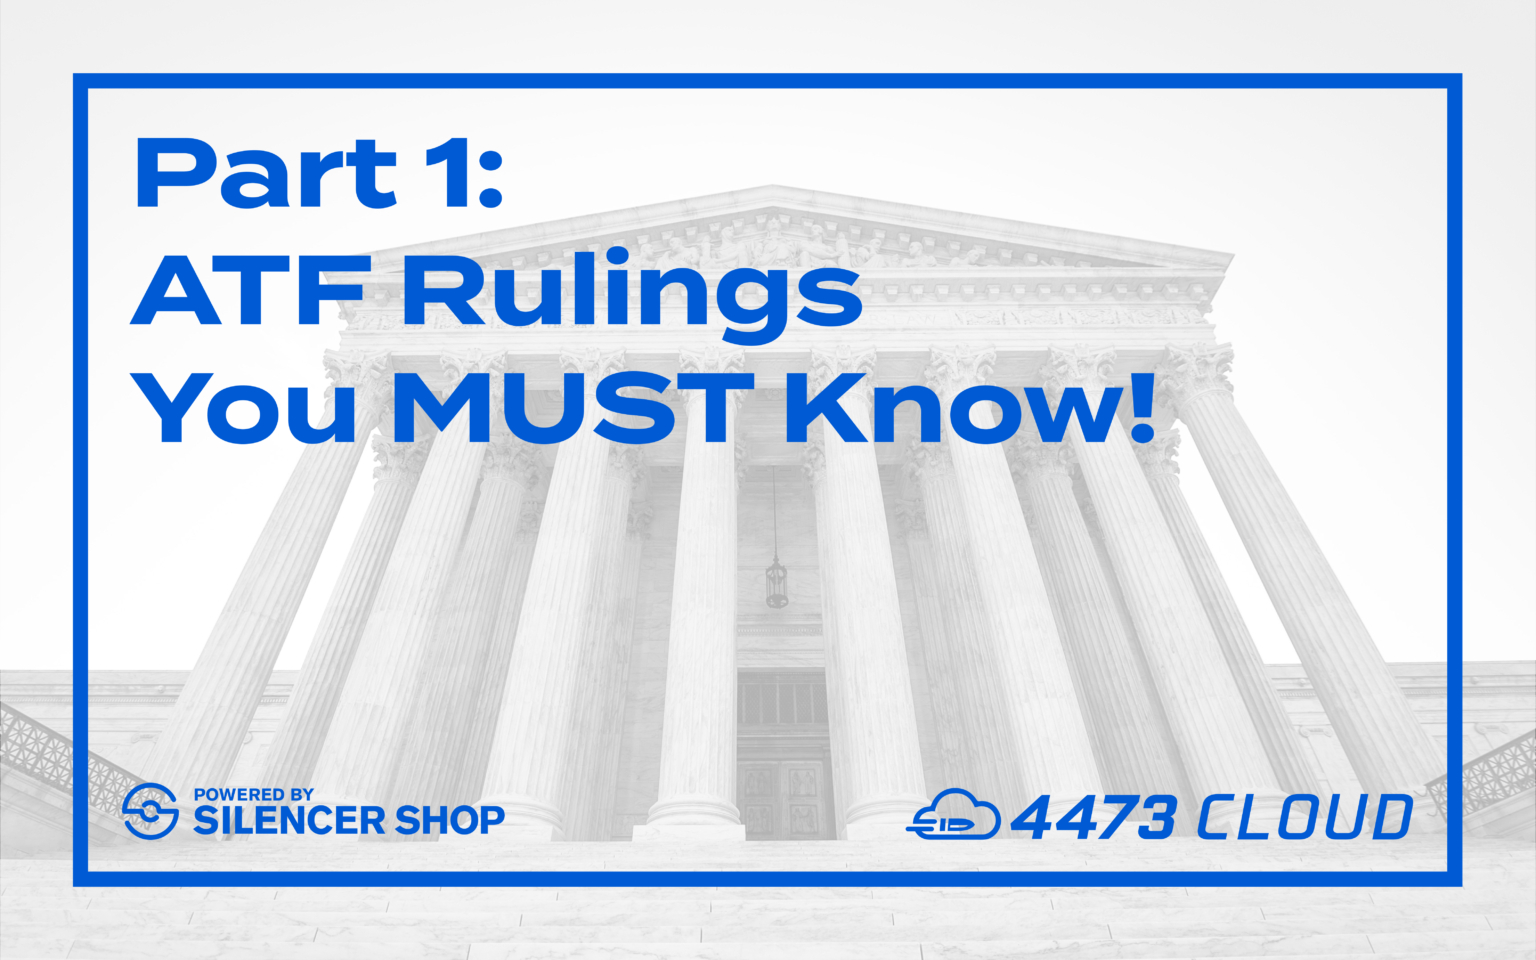 Part 1 ATF Rulings You MUST Know! 4473 Cloud